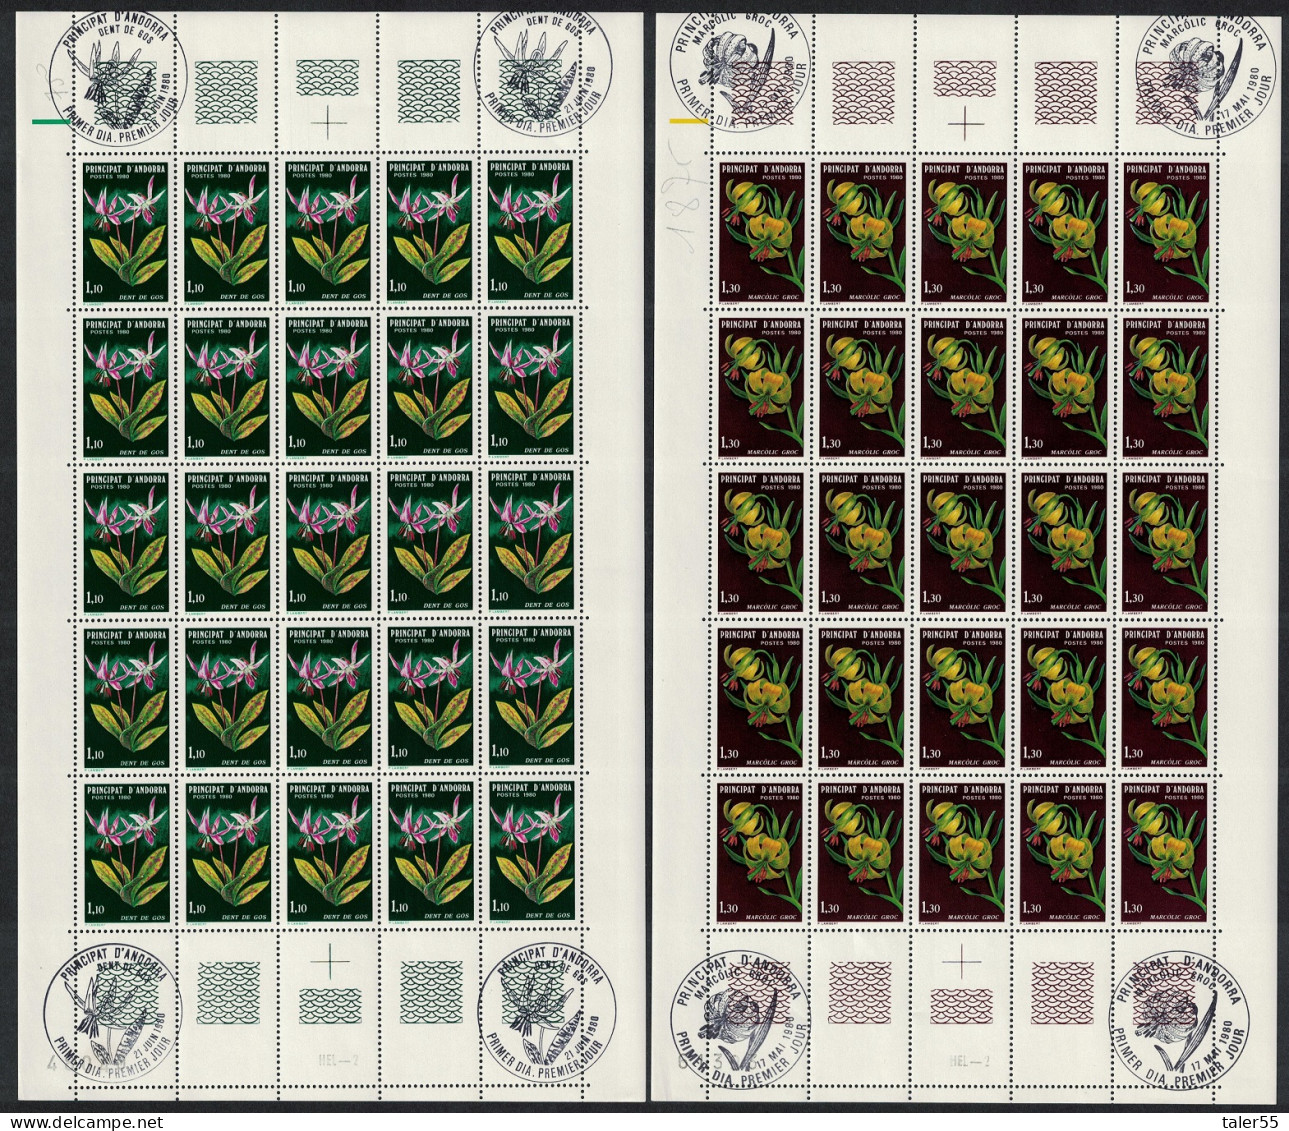 Andorra Fr. Nature Protection Flowers 2 Sheets FDC Cancel 1980 MNH SG#F305-F306 MI#307-308 Sc#281-282 - Neufs